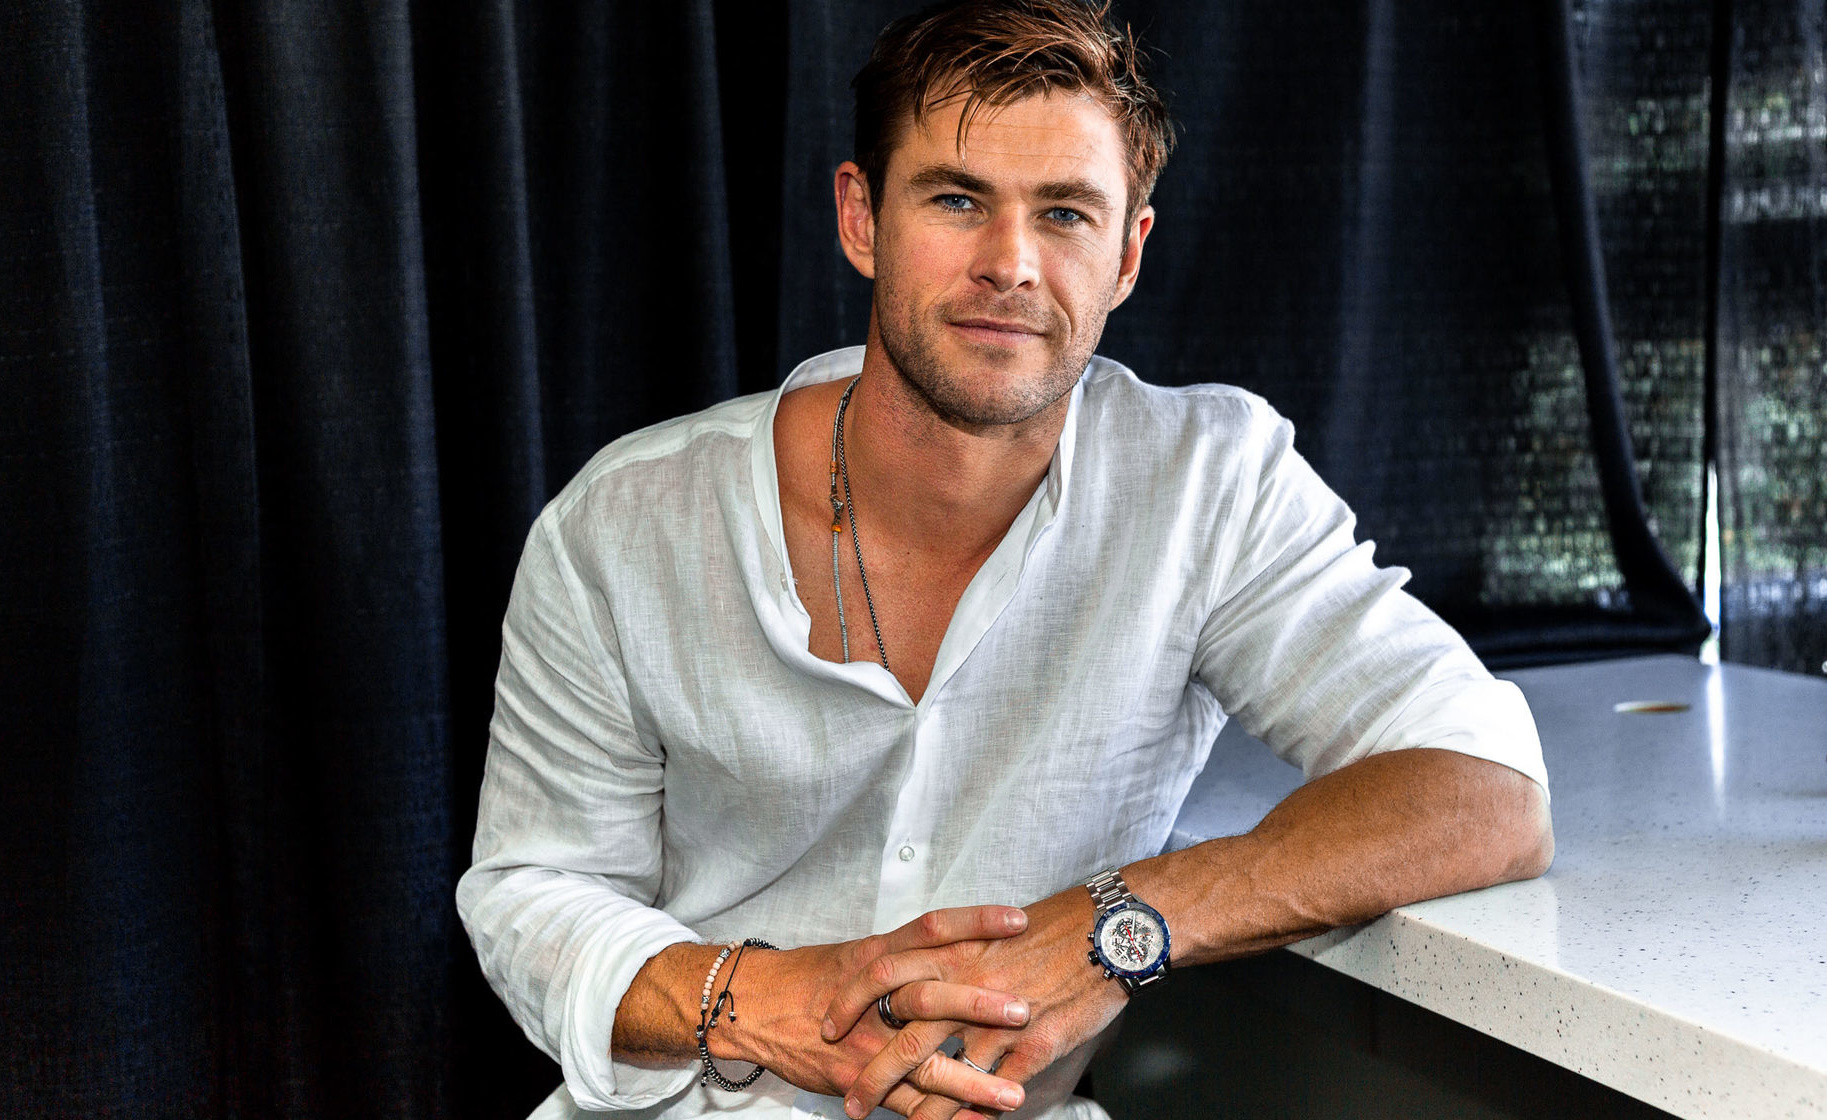 Chris Hemsworth's Rolex watch game just went to another level